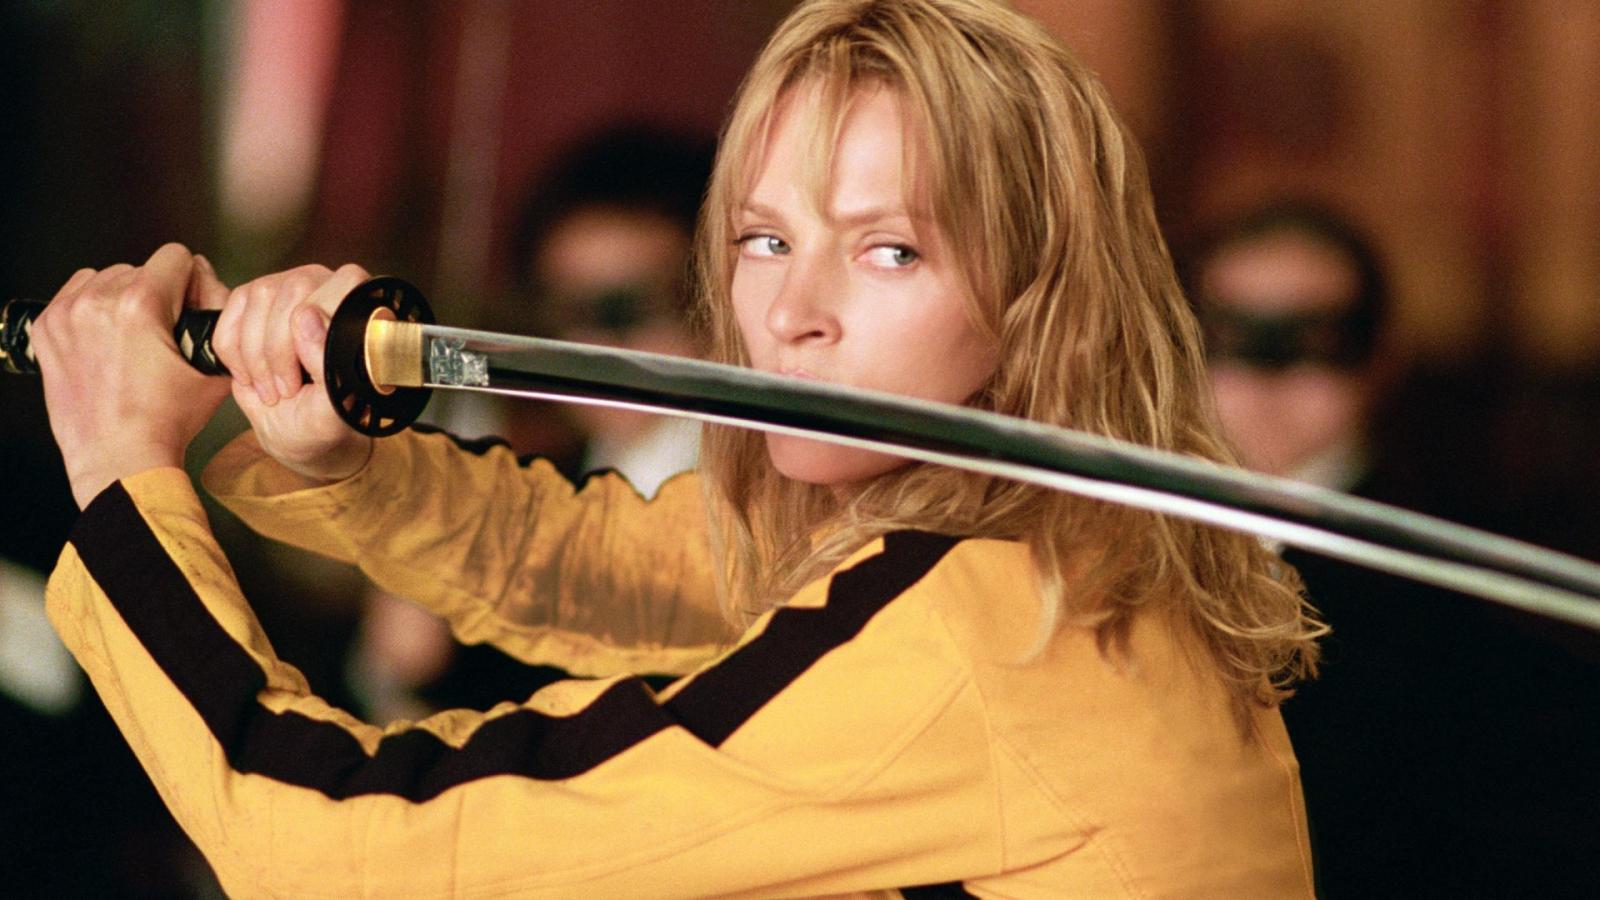 15 Action Films with Female Leads Who Stole the Show - image 2